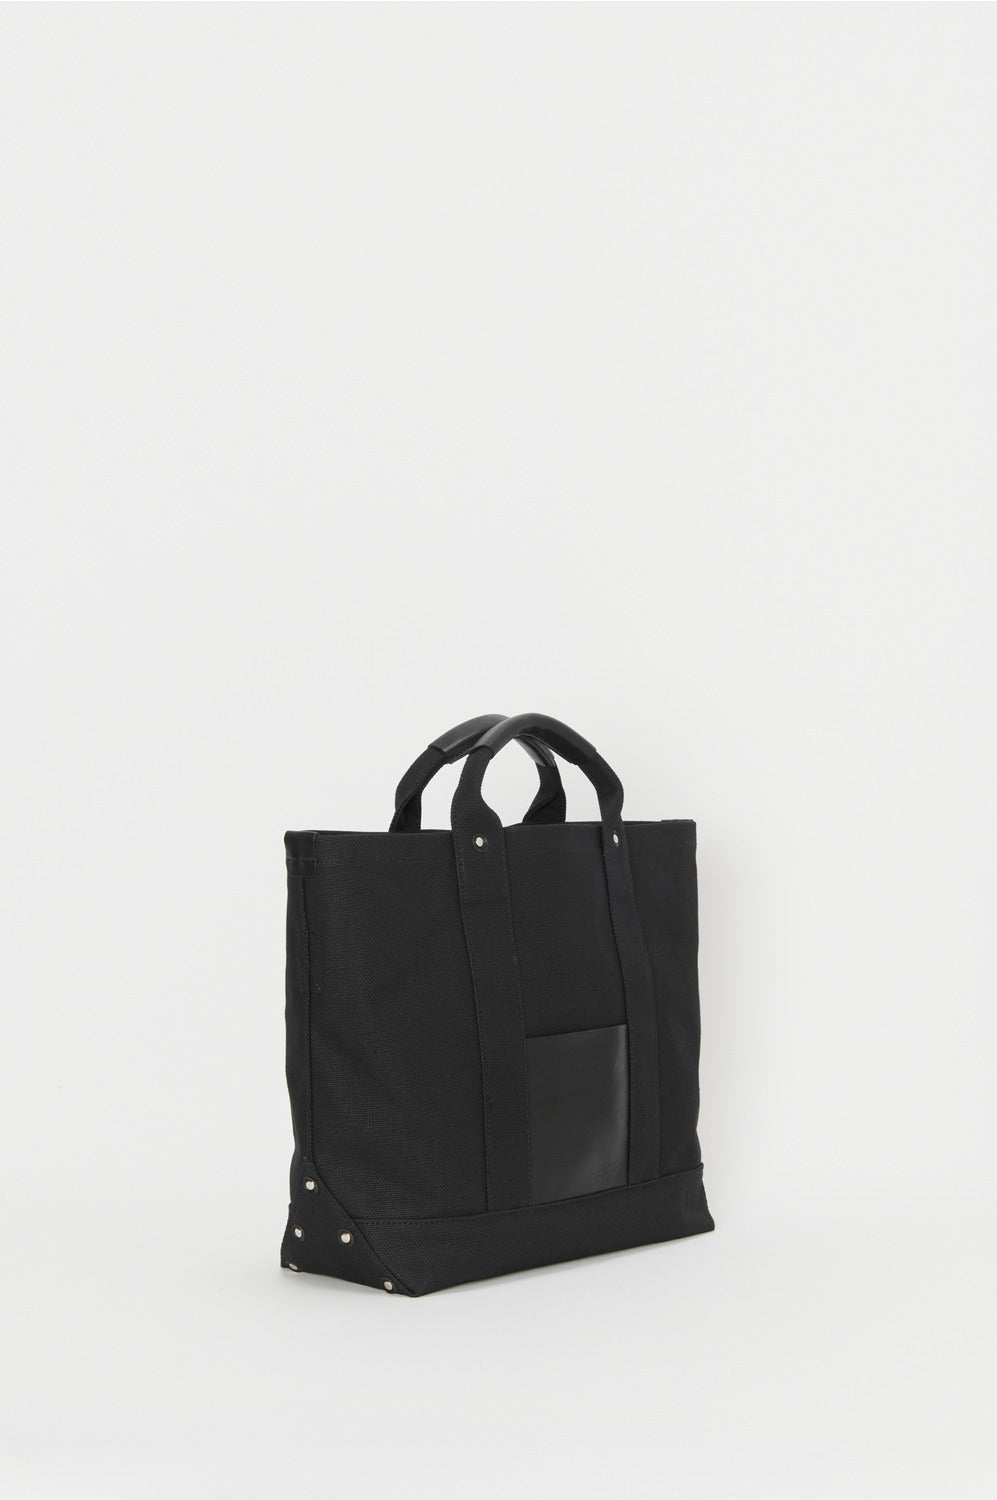 Hender Scheme campus tote small – unexpected store